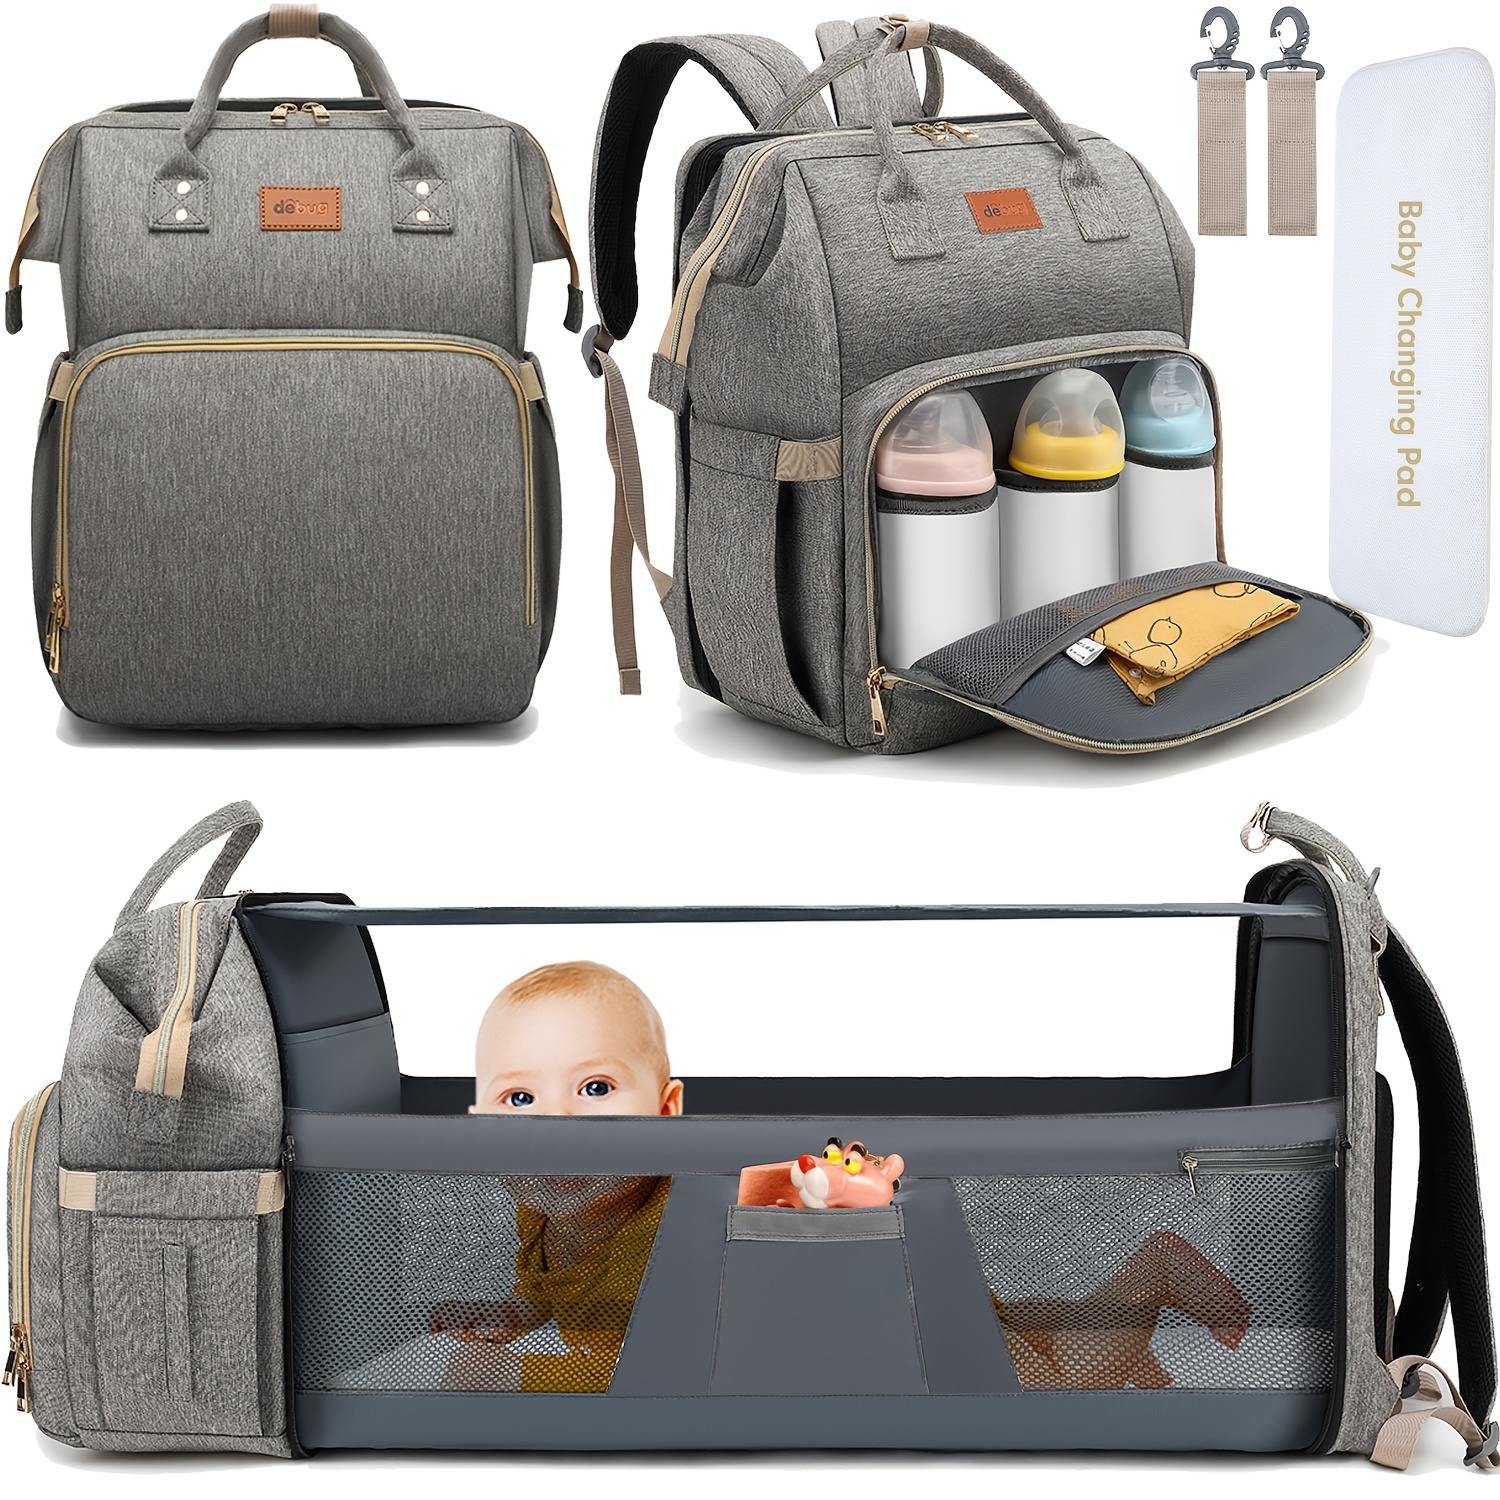 Baby Diaper Bag Backpack with Changing Station - Waterproof, Large 30L  Capacity for Boy, Girl, Mom, Dad - Travel Baby Bag with Stroller Straps